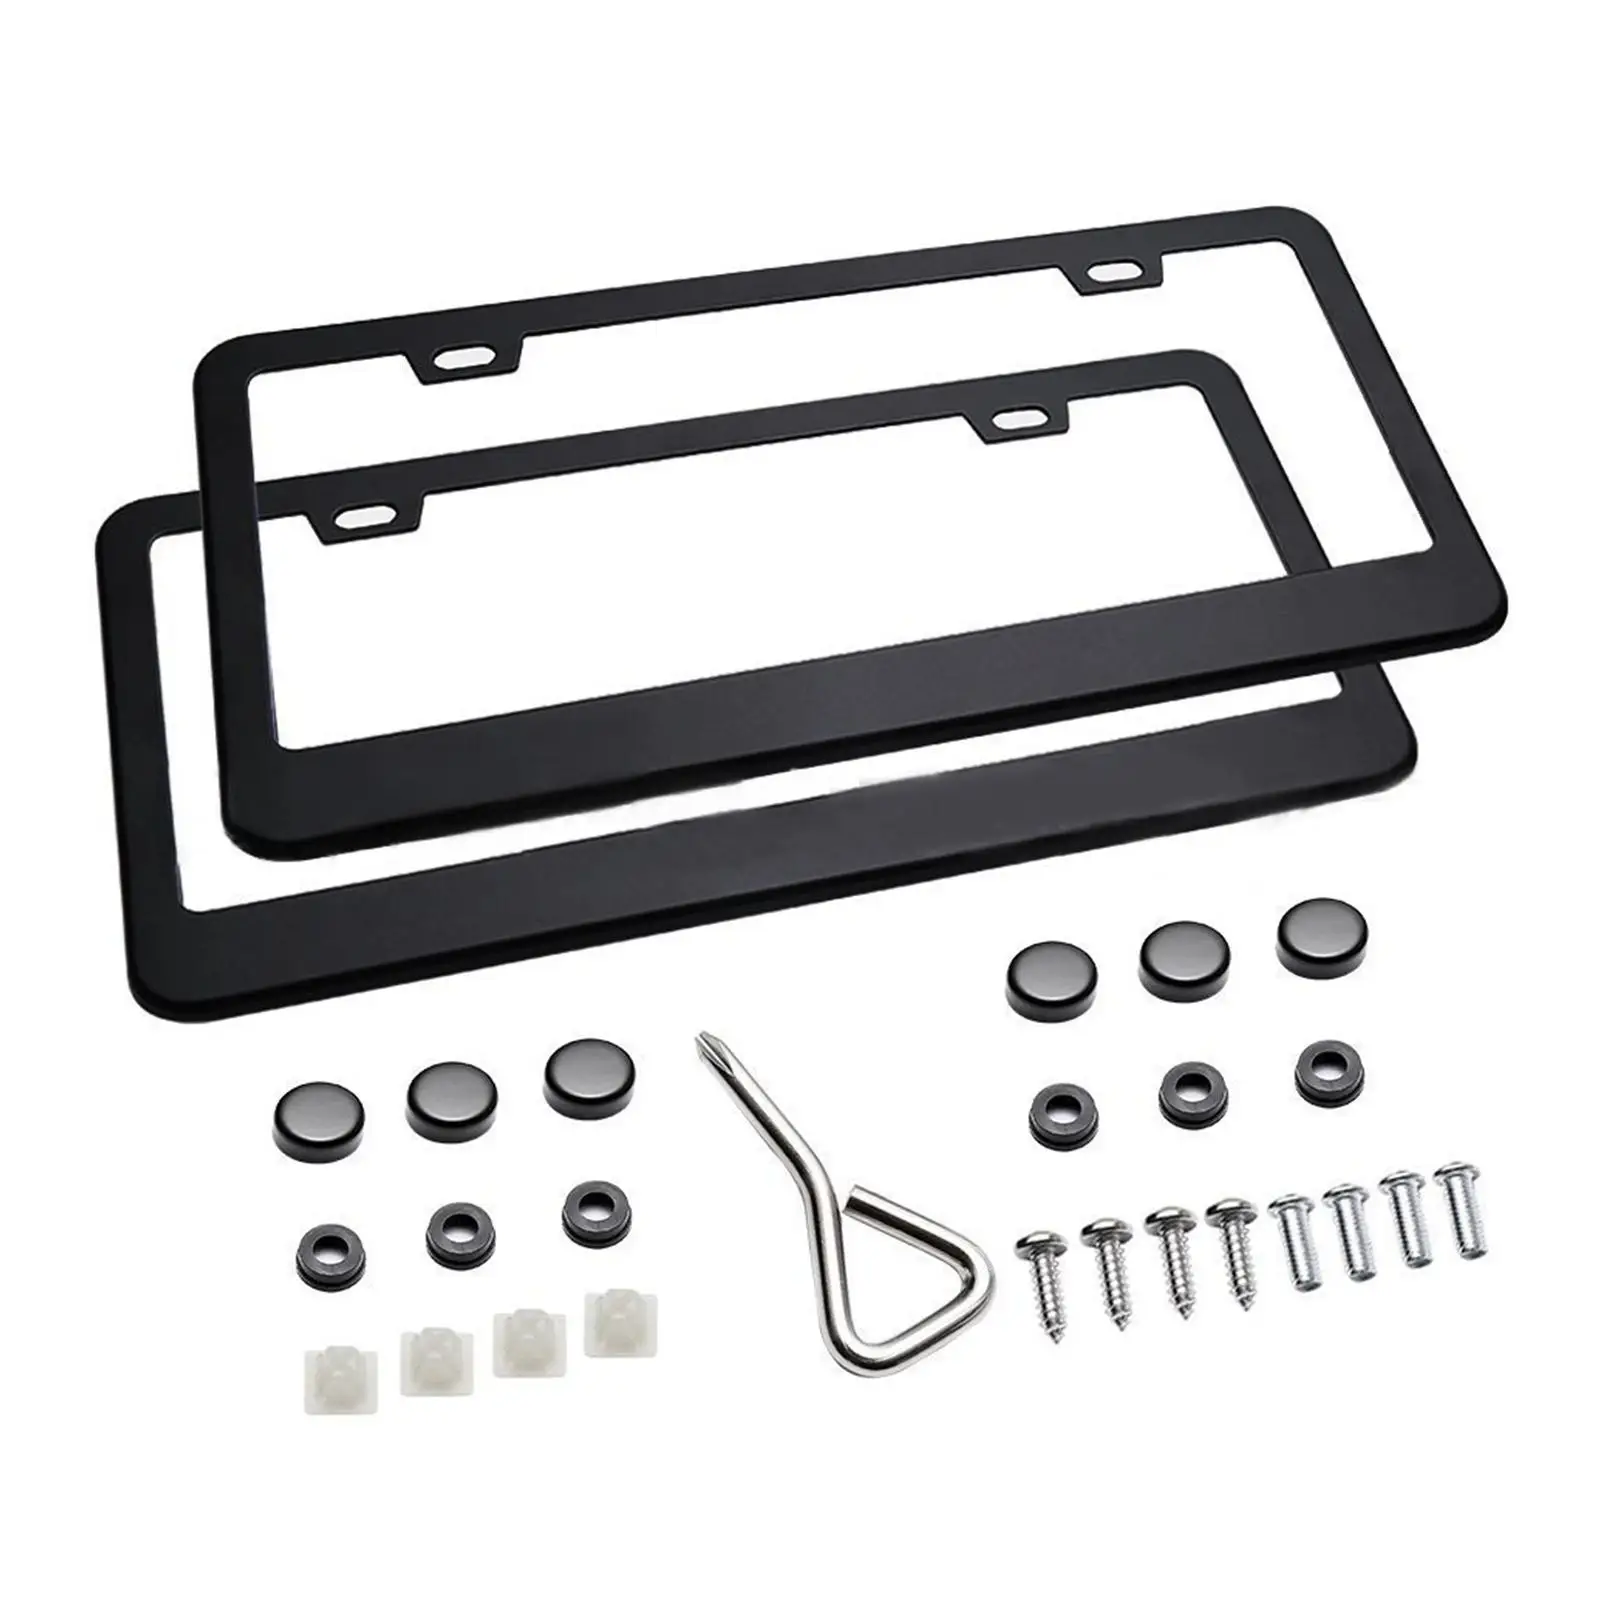 2x Front Rear License Plate Frame High Performance Auto Decoration Professional Number Plate Holder for US Standard Plates